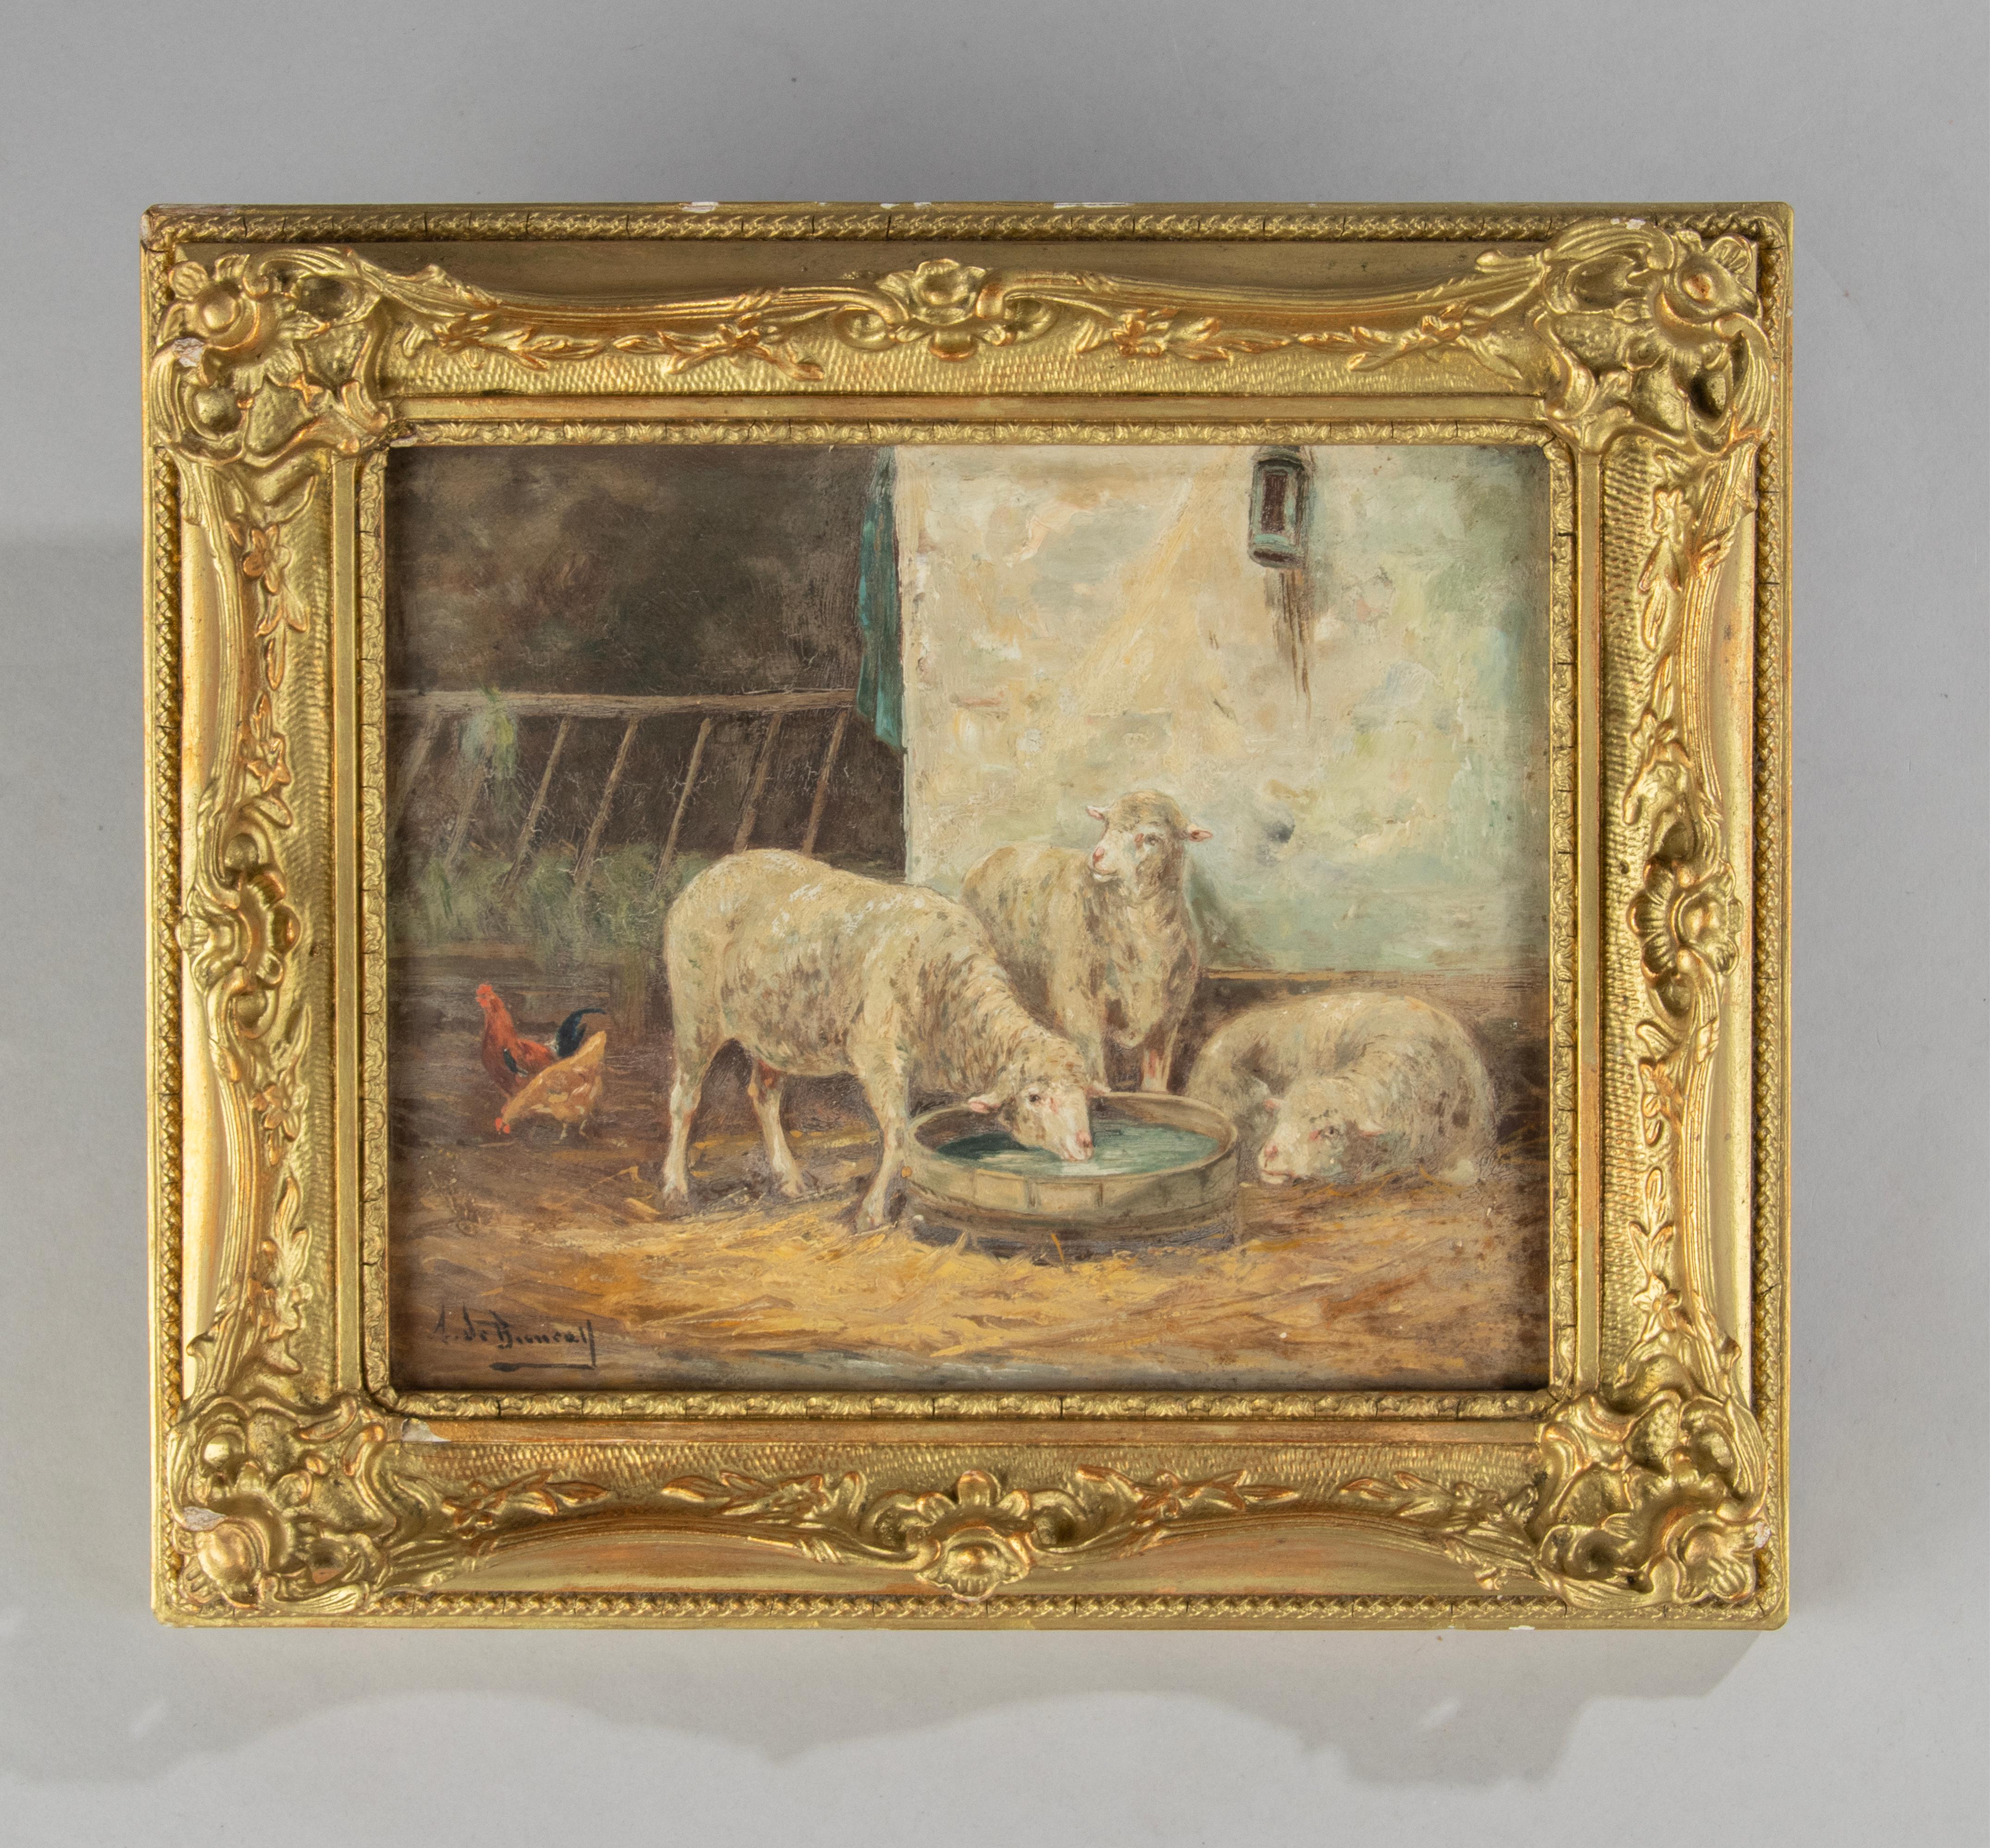 An antique oil painting on a wooden panel. Depicting three sheep in a barn. The painting is signed, but the signature is illegible (A. de Benau?) The frame is made of cold gilded gesso on a wooden base.

Dimensions frame: 32 x 37 cm
Dimensions